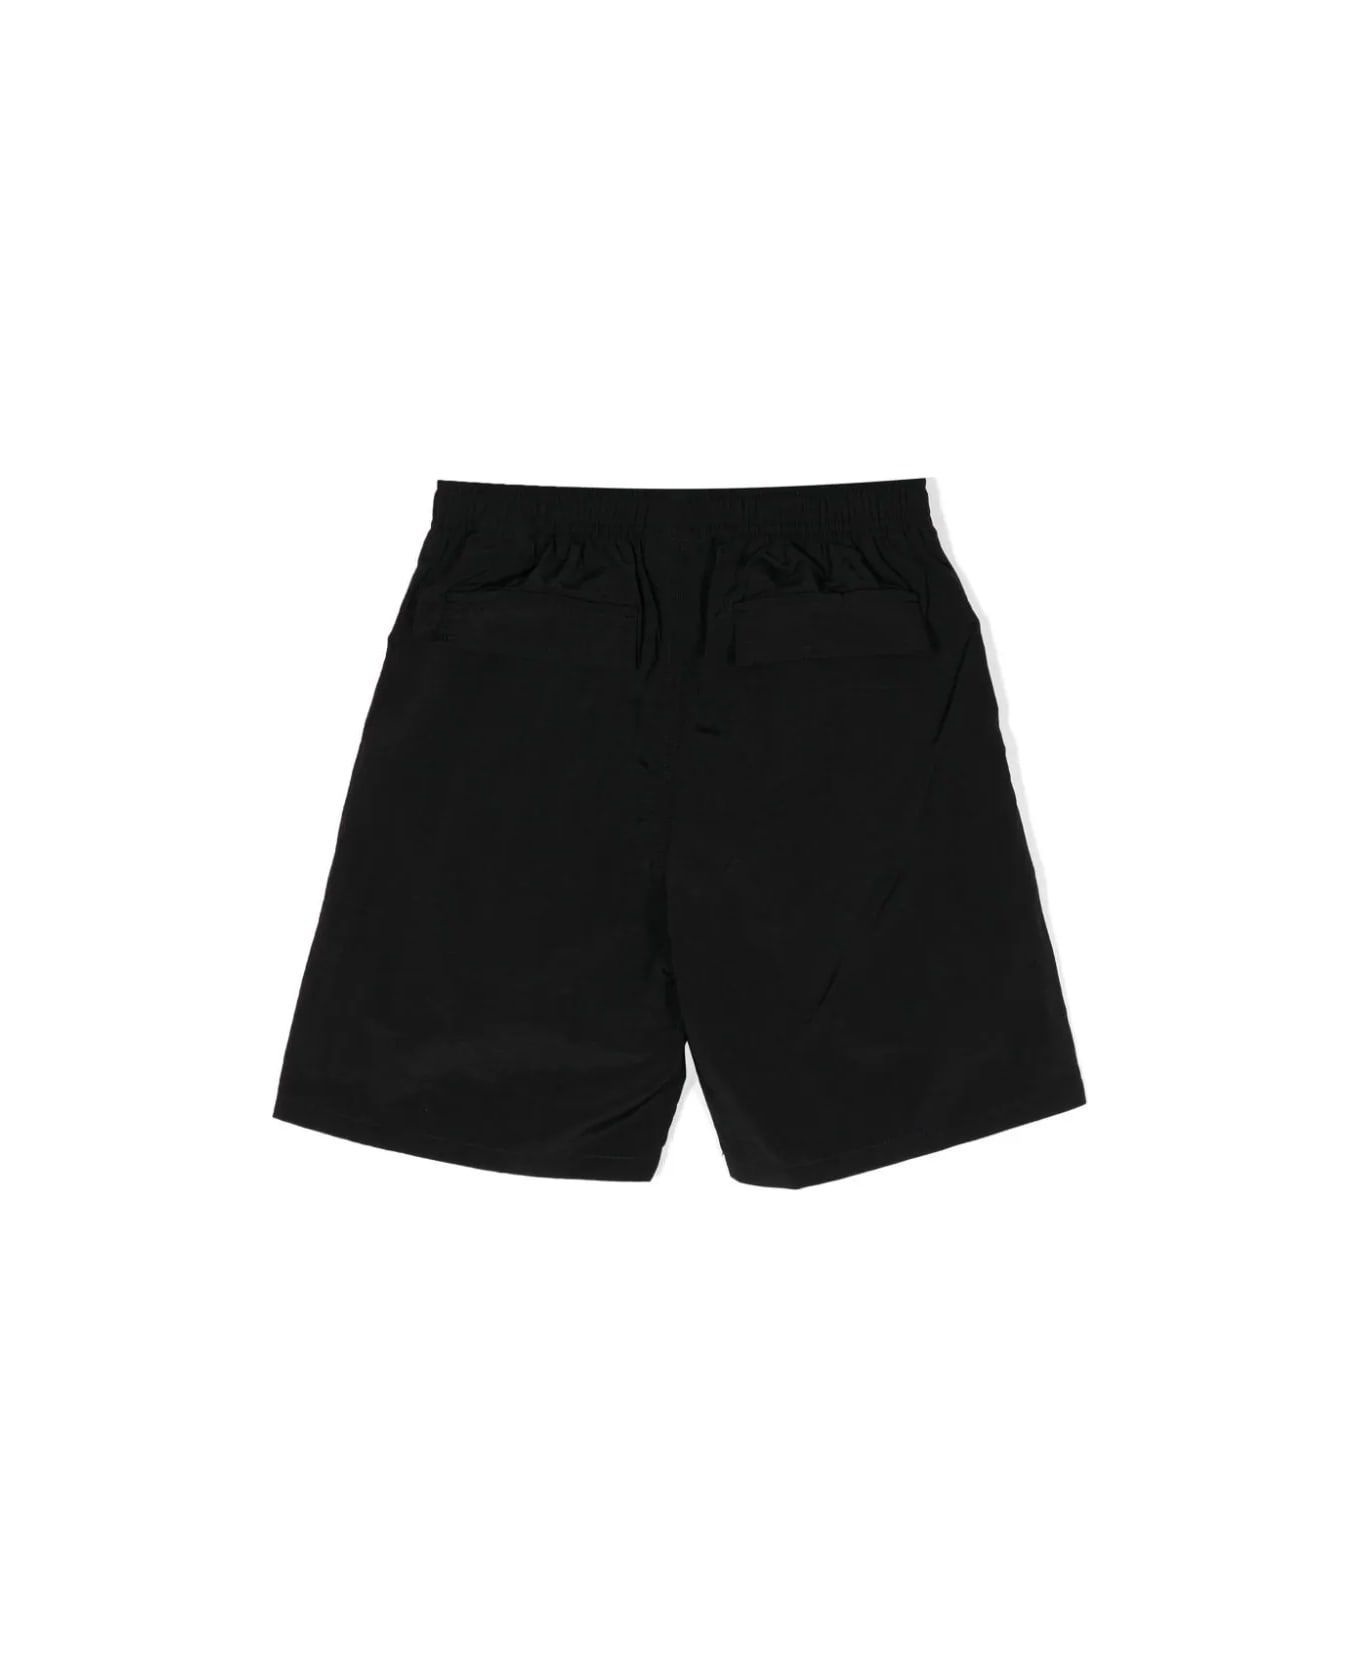 Marcelo Burlon Shorts With Embroidery - Black ボトムス